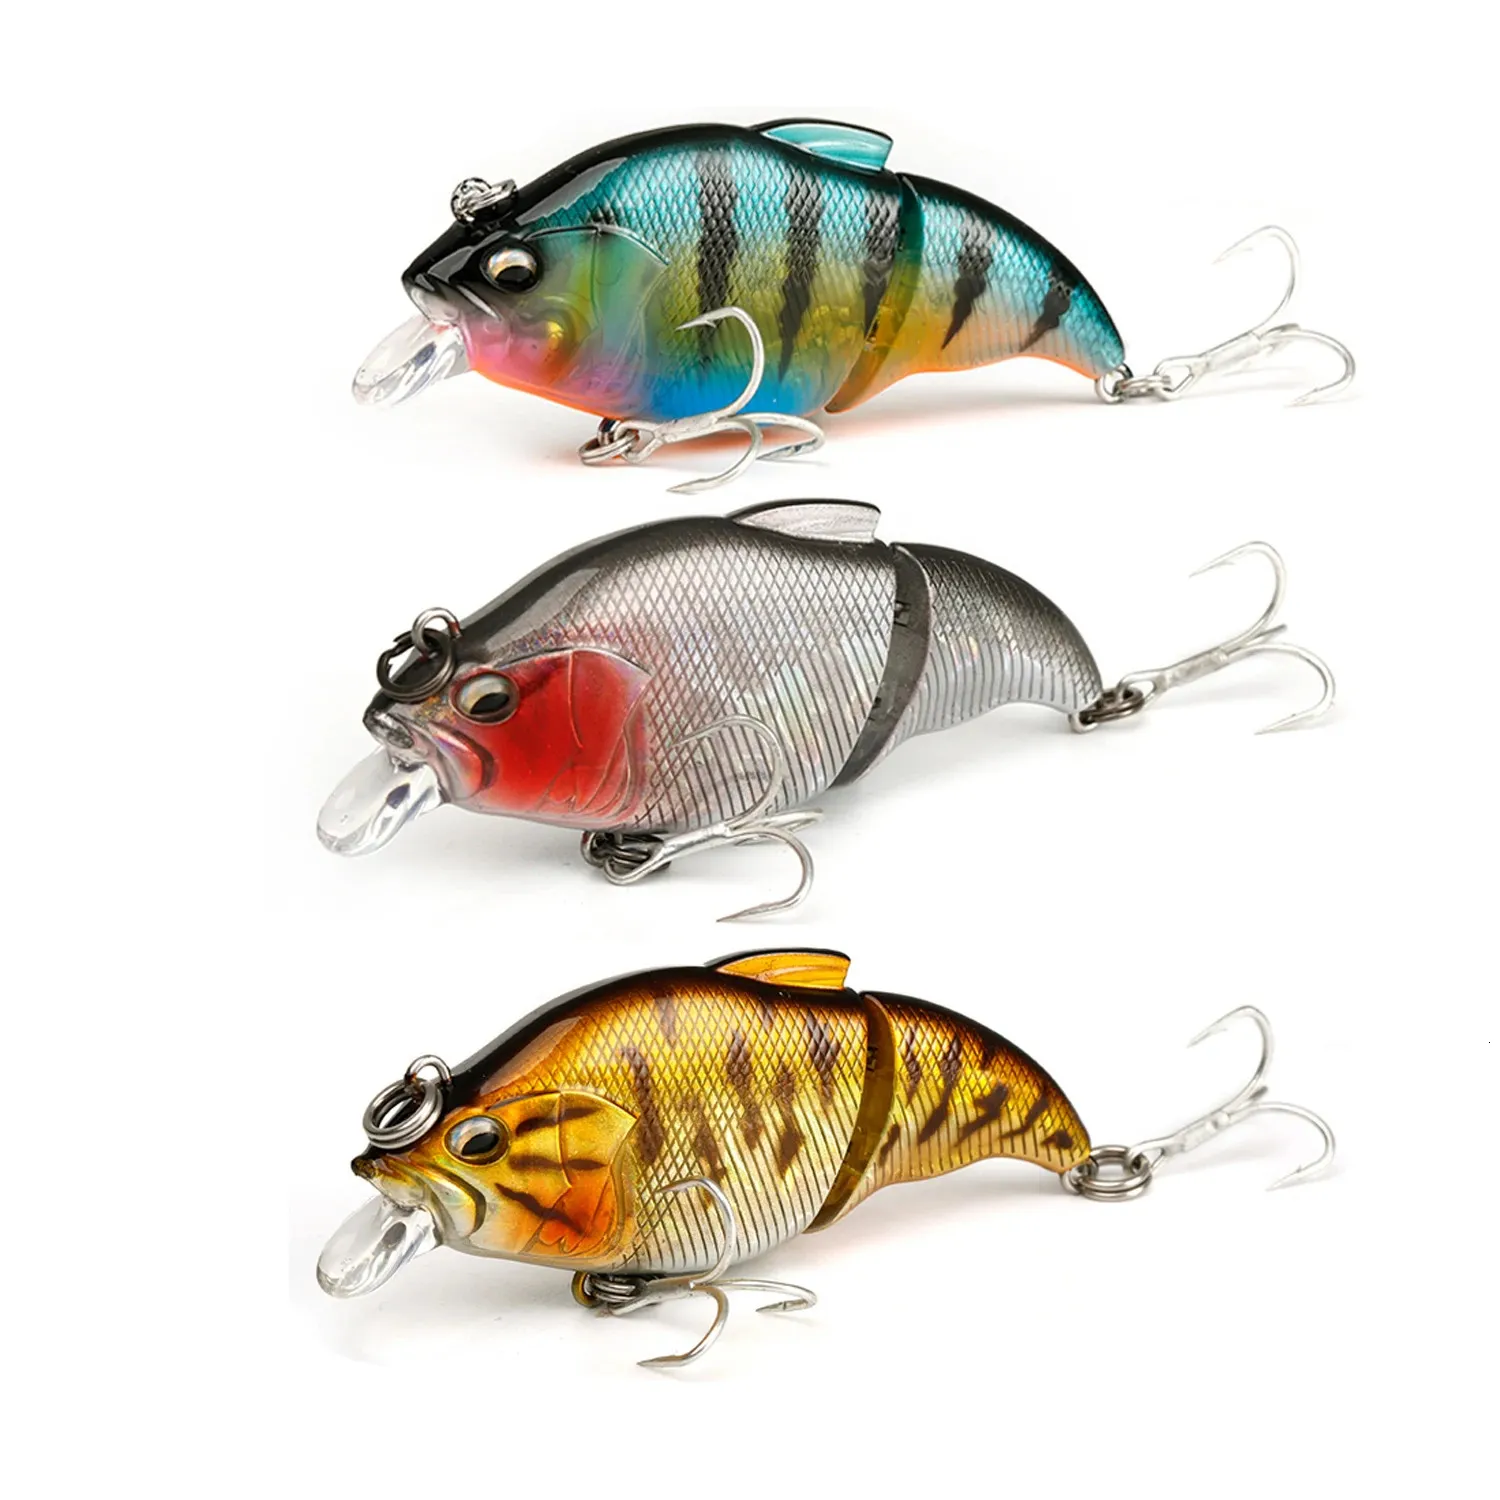 JOHNCOO Fishing Lure Sinking Floating Wobbler SwimShad Glide Baits VIB  Vibration Bait Pike Trout Muskie Bass 231229 From Heng05, $15.65